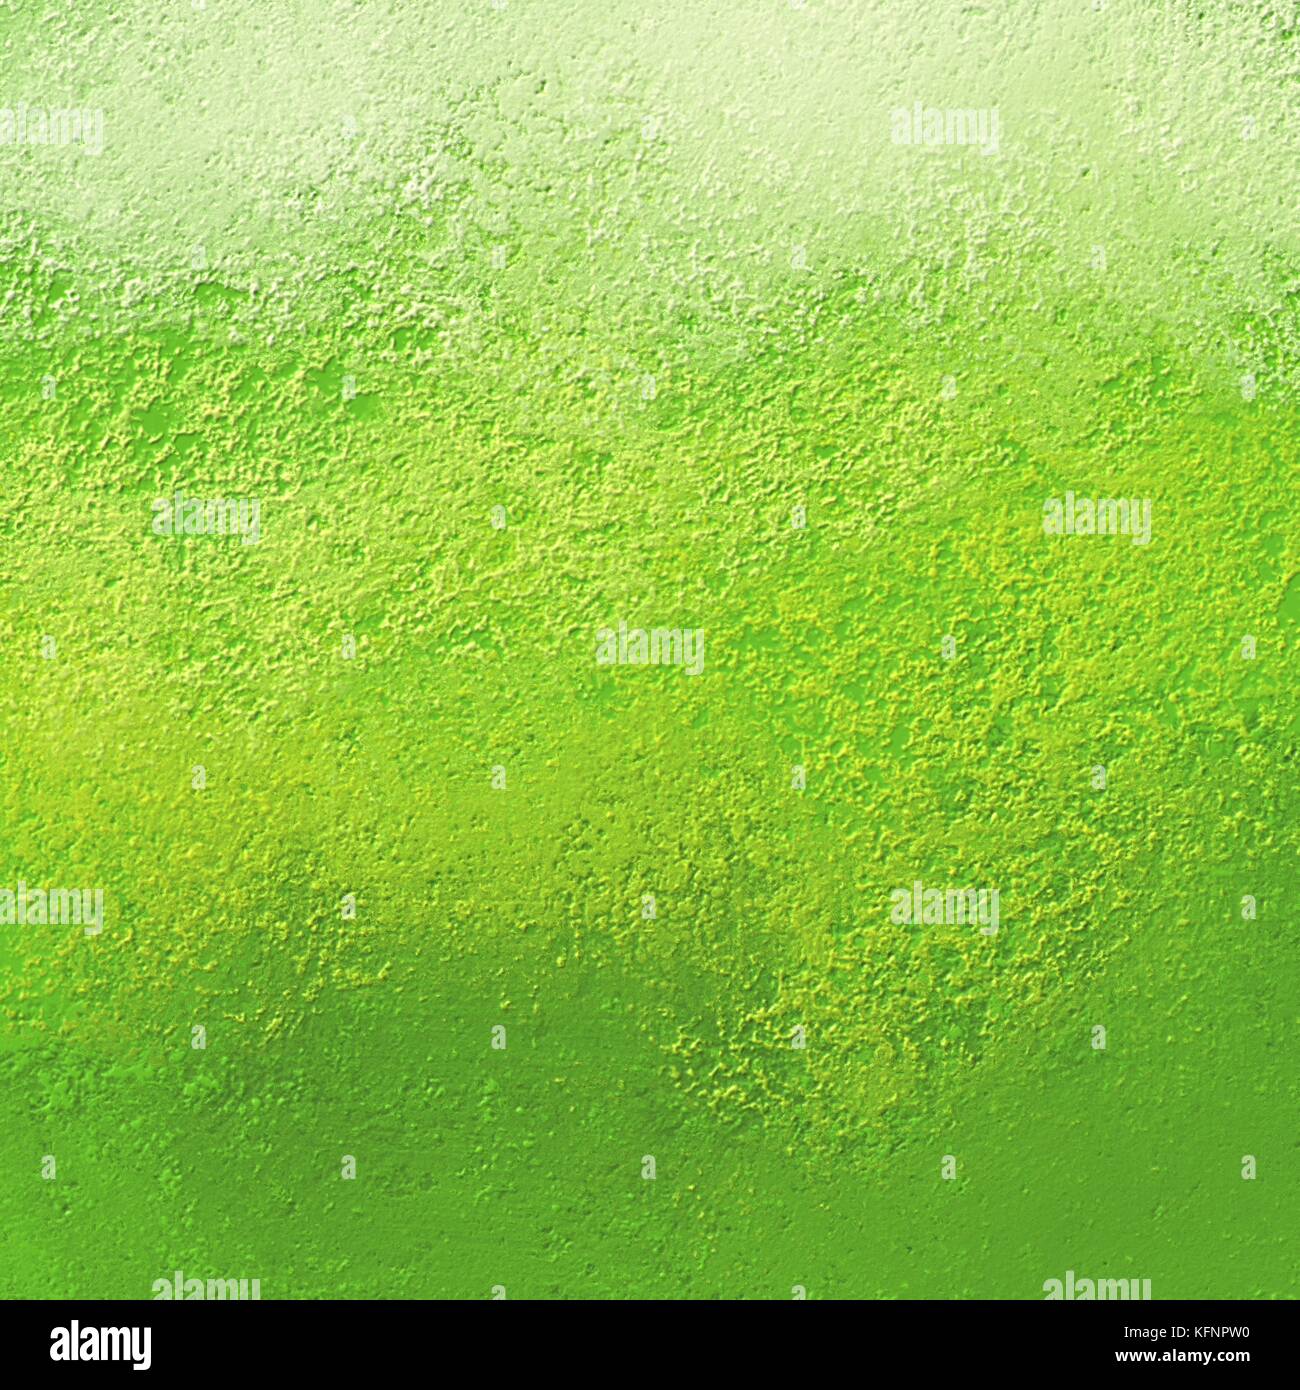 599,743 Green White Gradient Images, Stock Photos, 3D objects, & Vectors